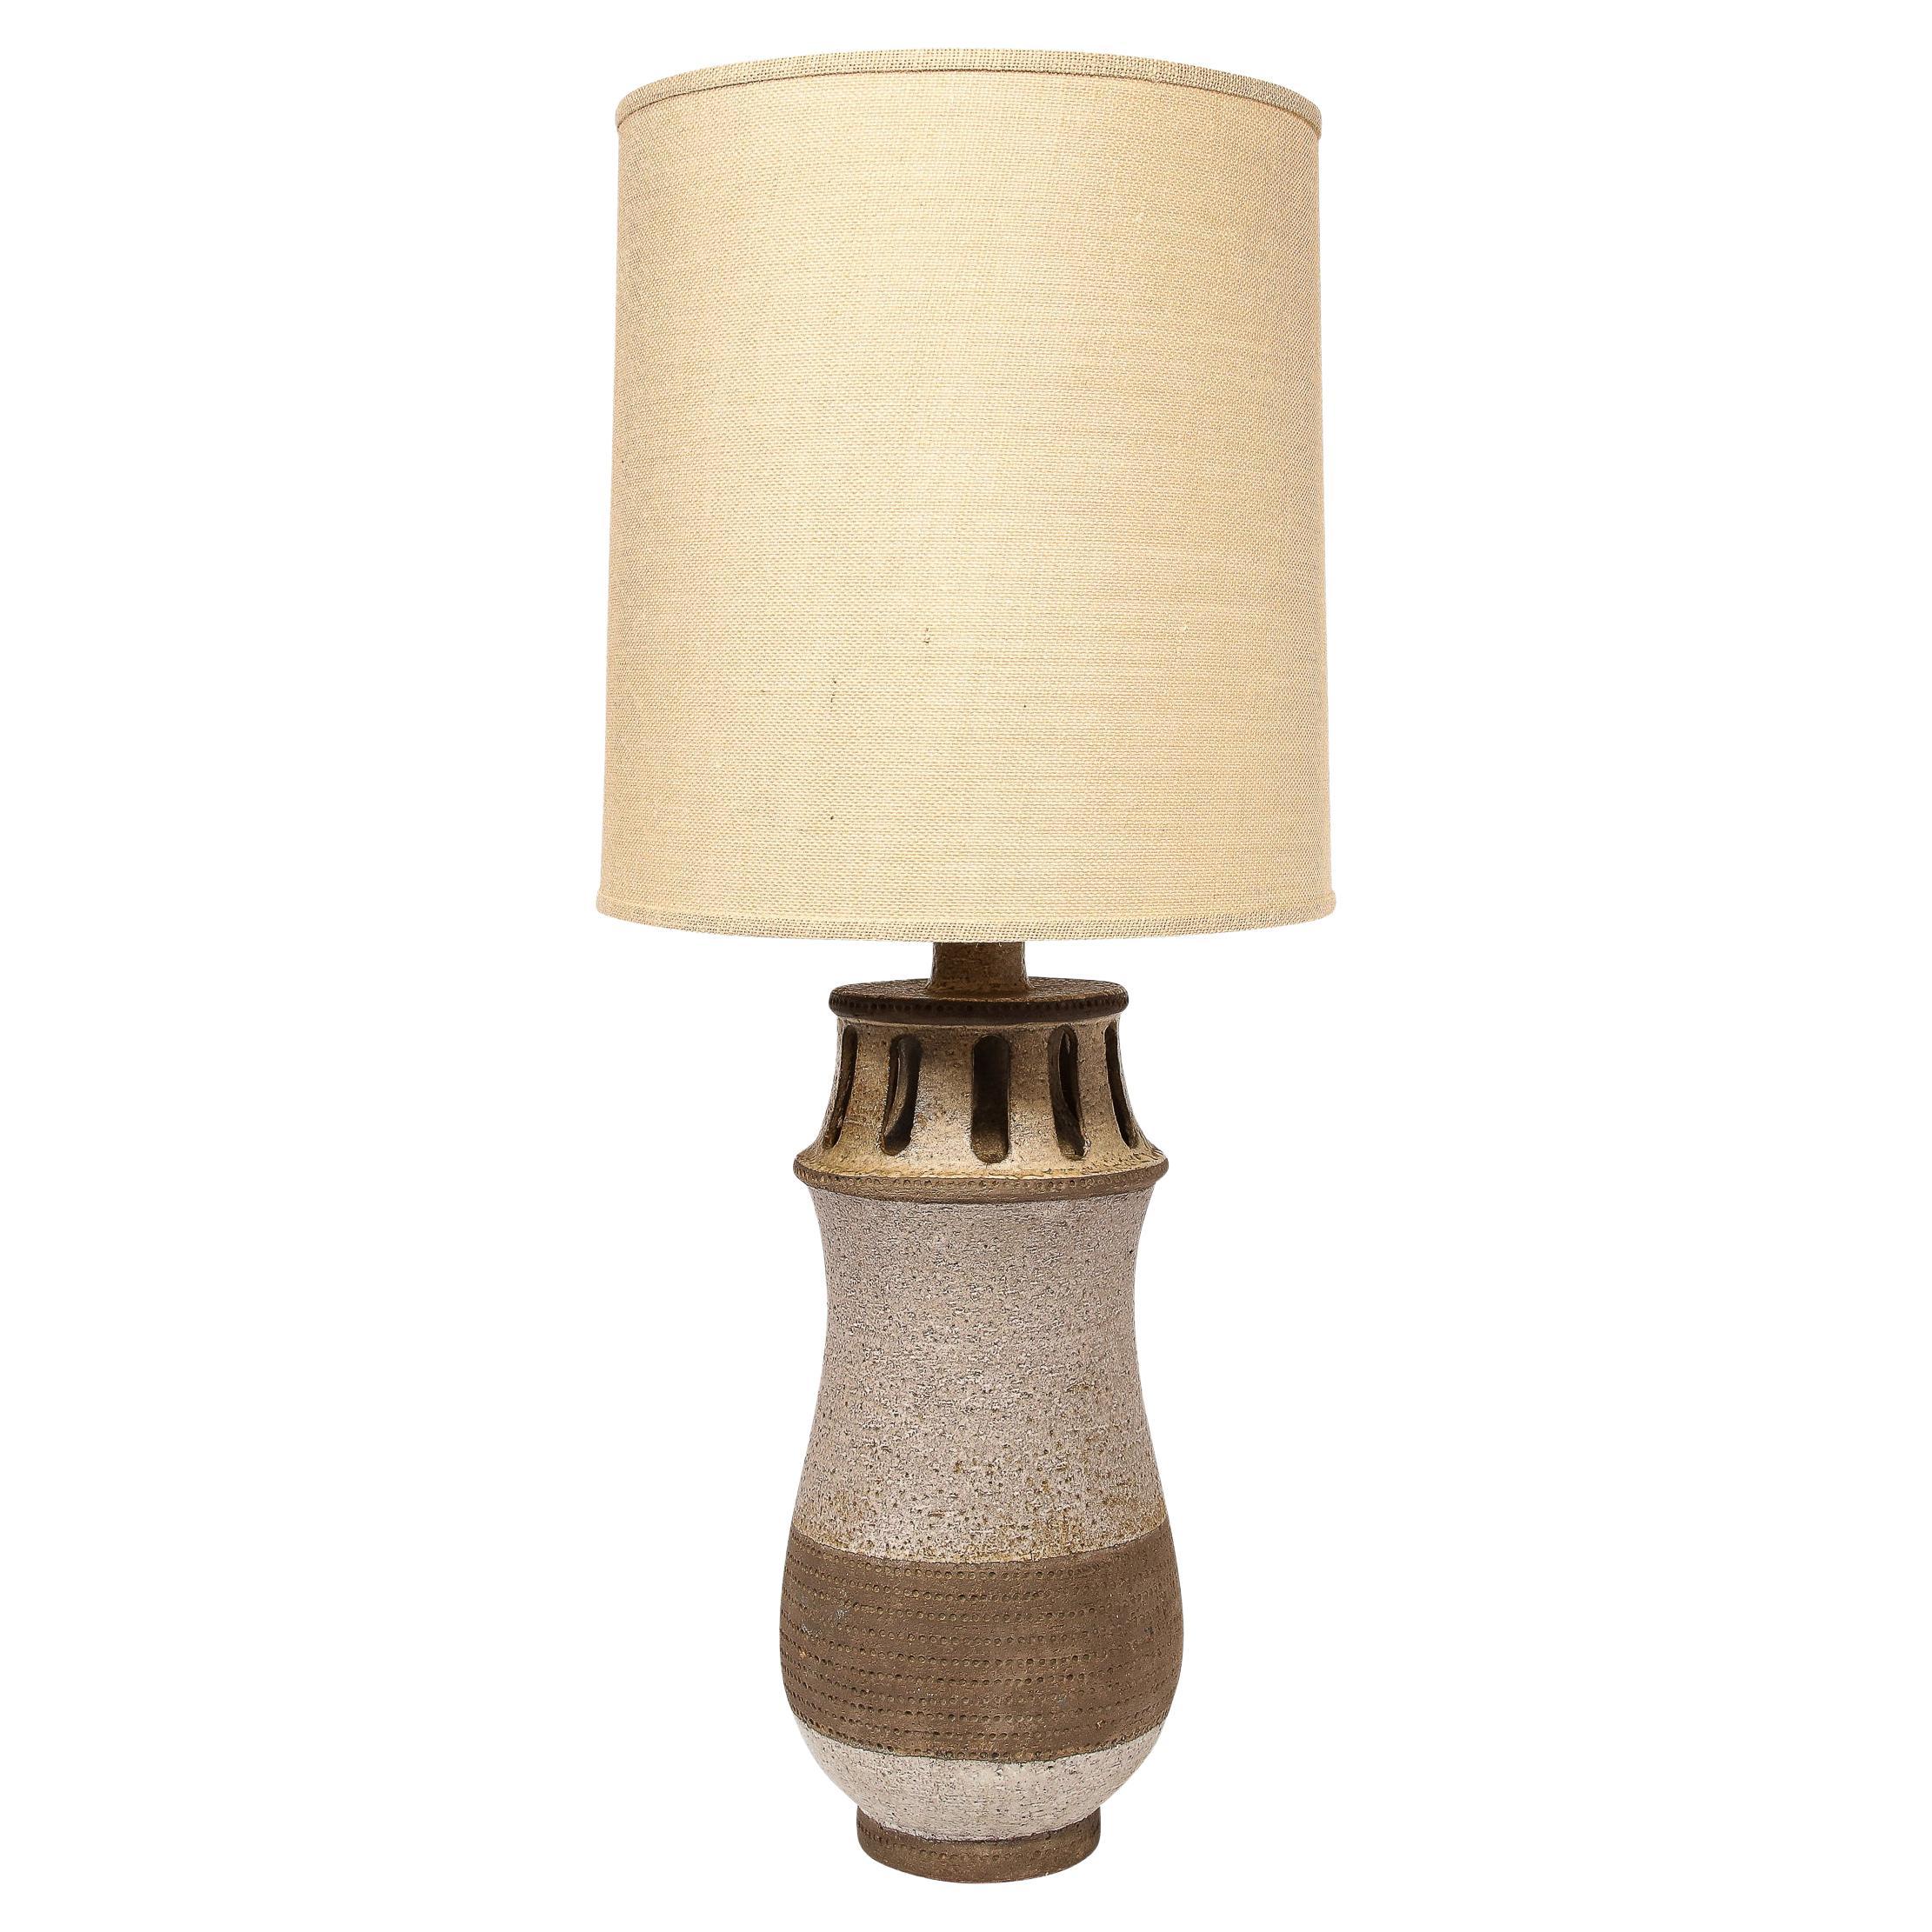 Mid-Century Modern Ceramic Table Lamp w/ Arcade Detailing and Raw Fiber Shade For Sale